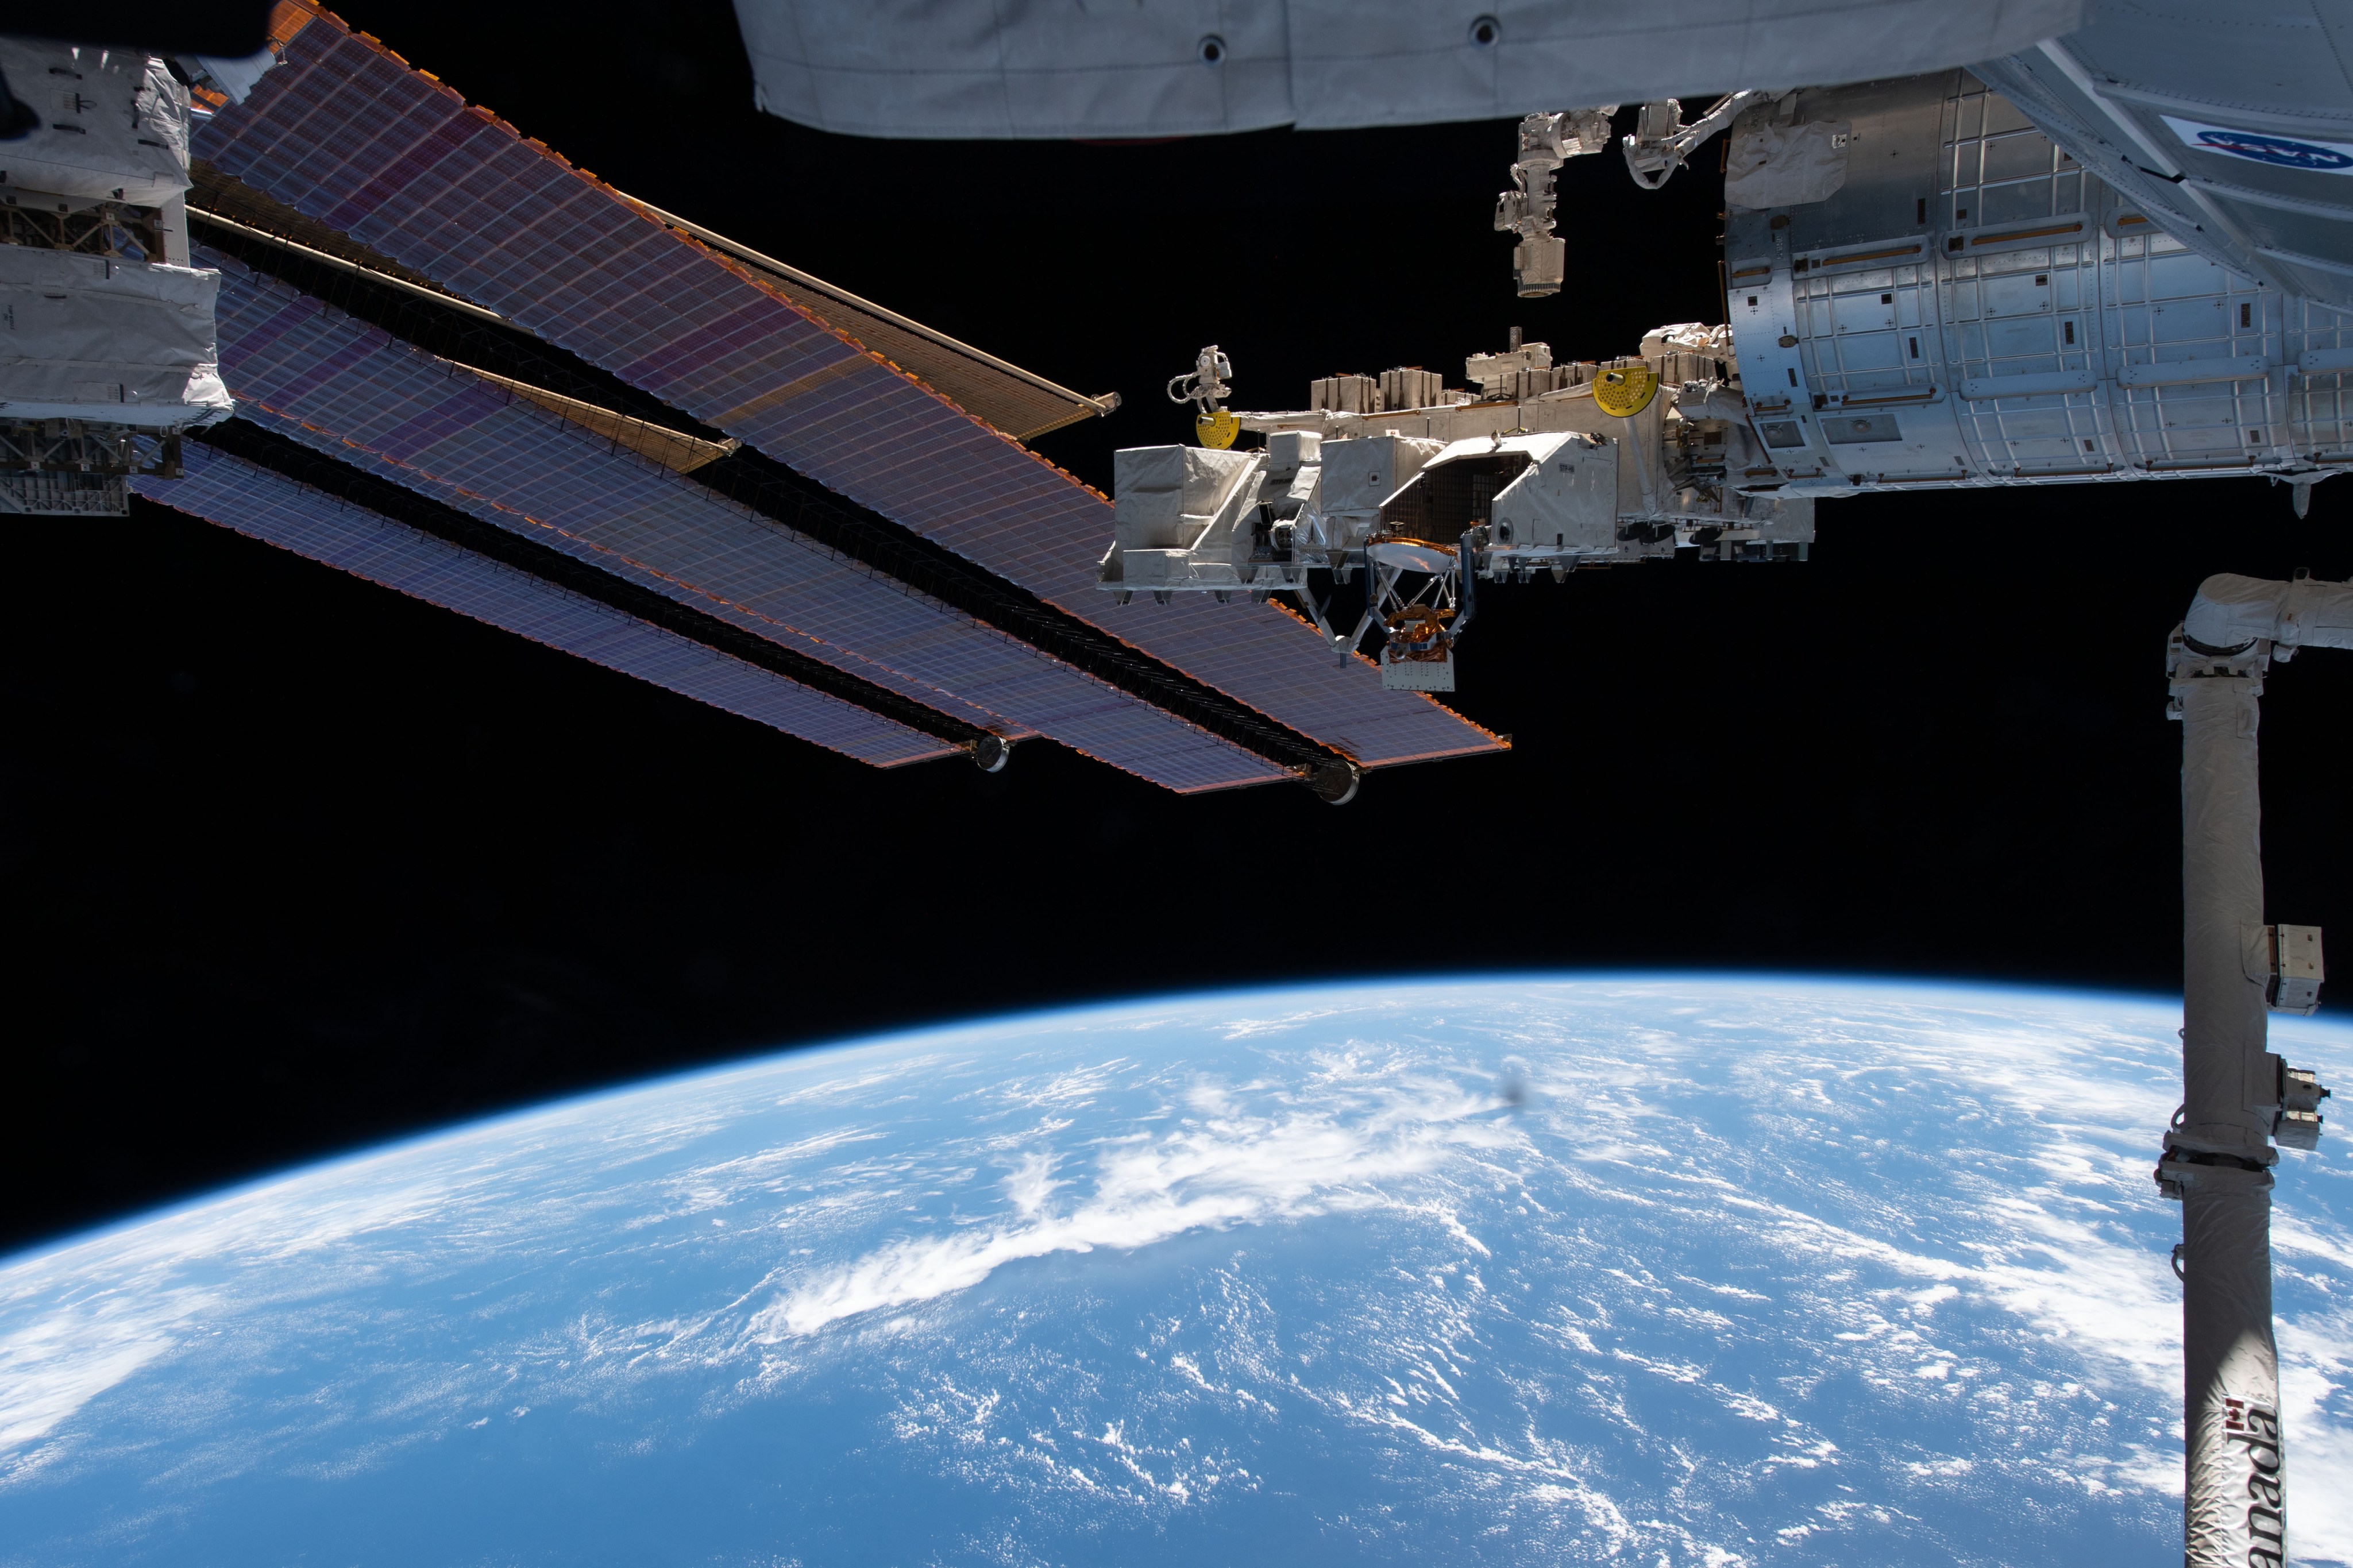 Parts of the International Space Station are visible above the Pacific Ocean in this image taken from ISS.